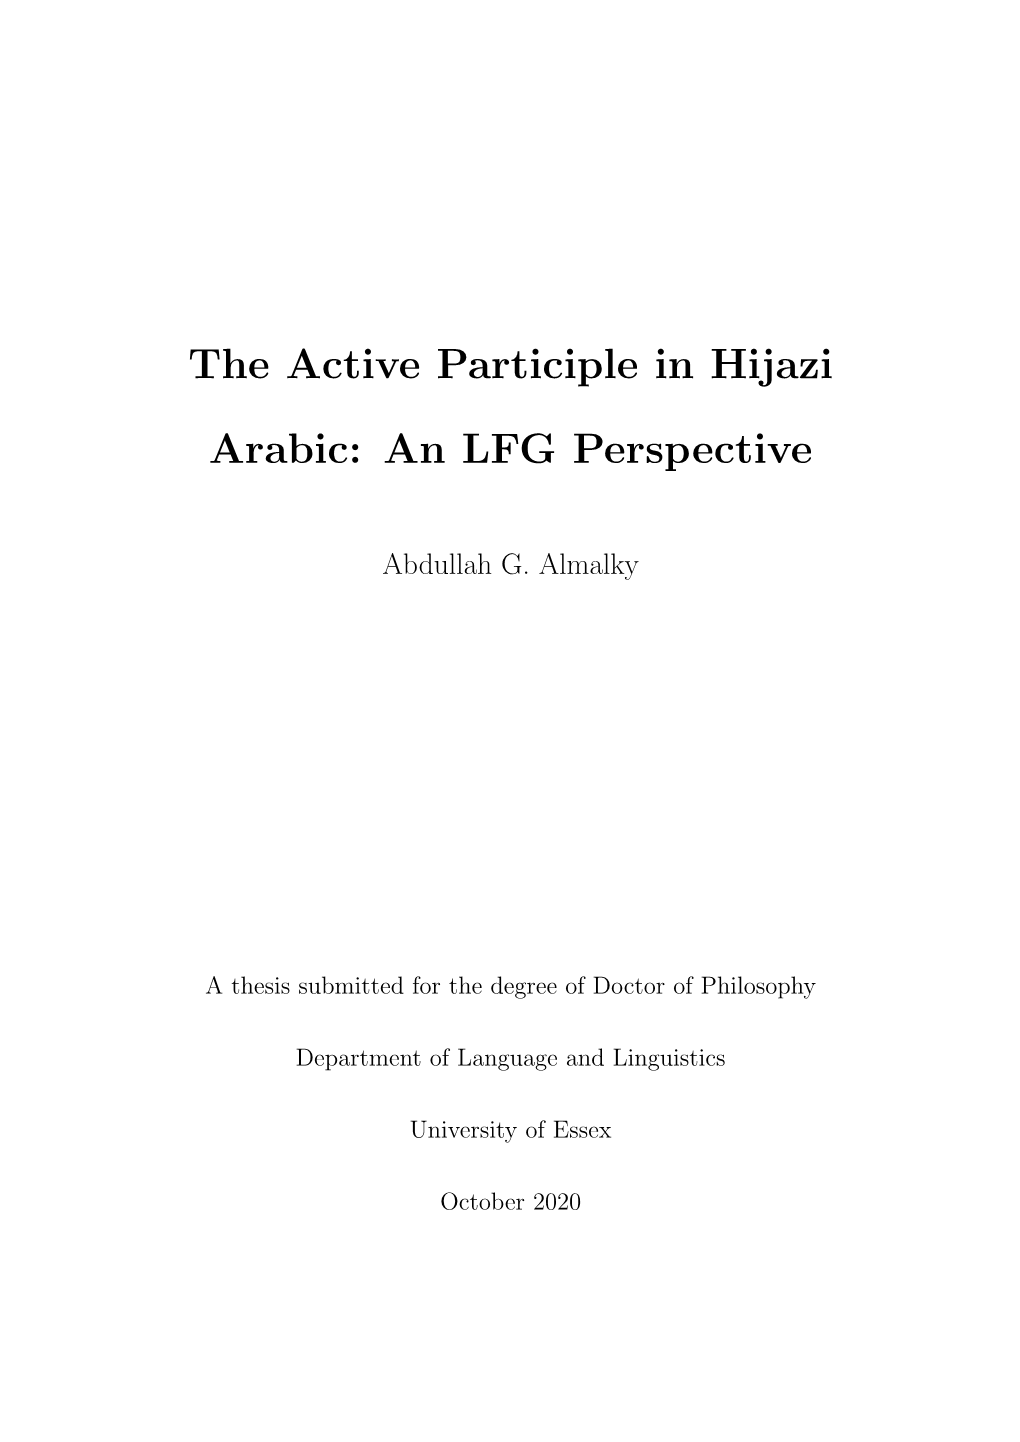 The Active Participle in Hijazi Arabic: an LFG Perspective